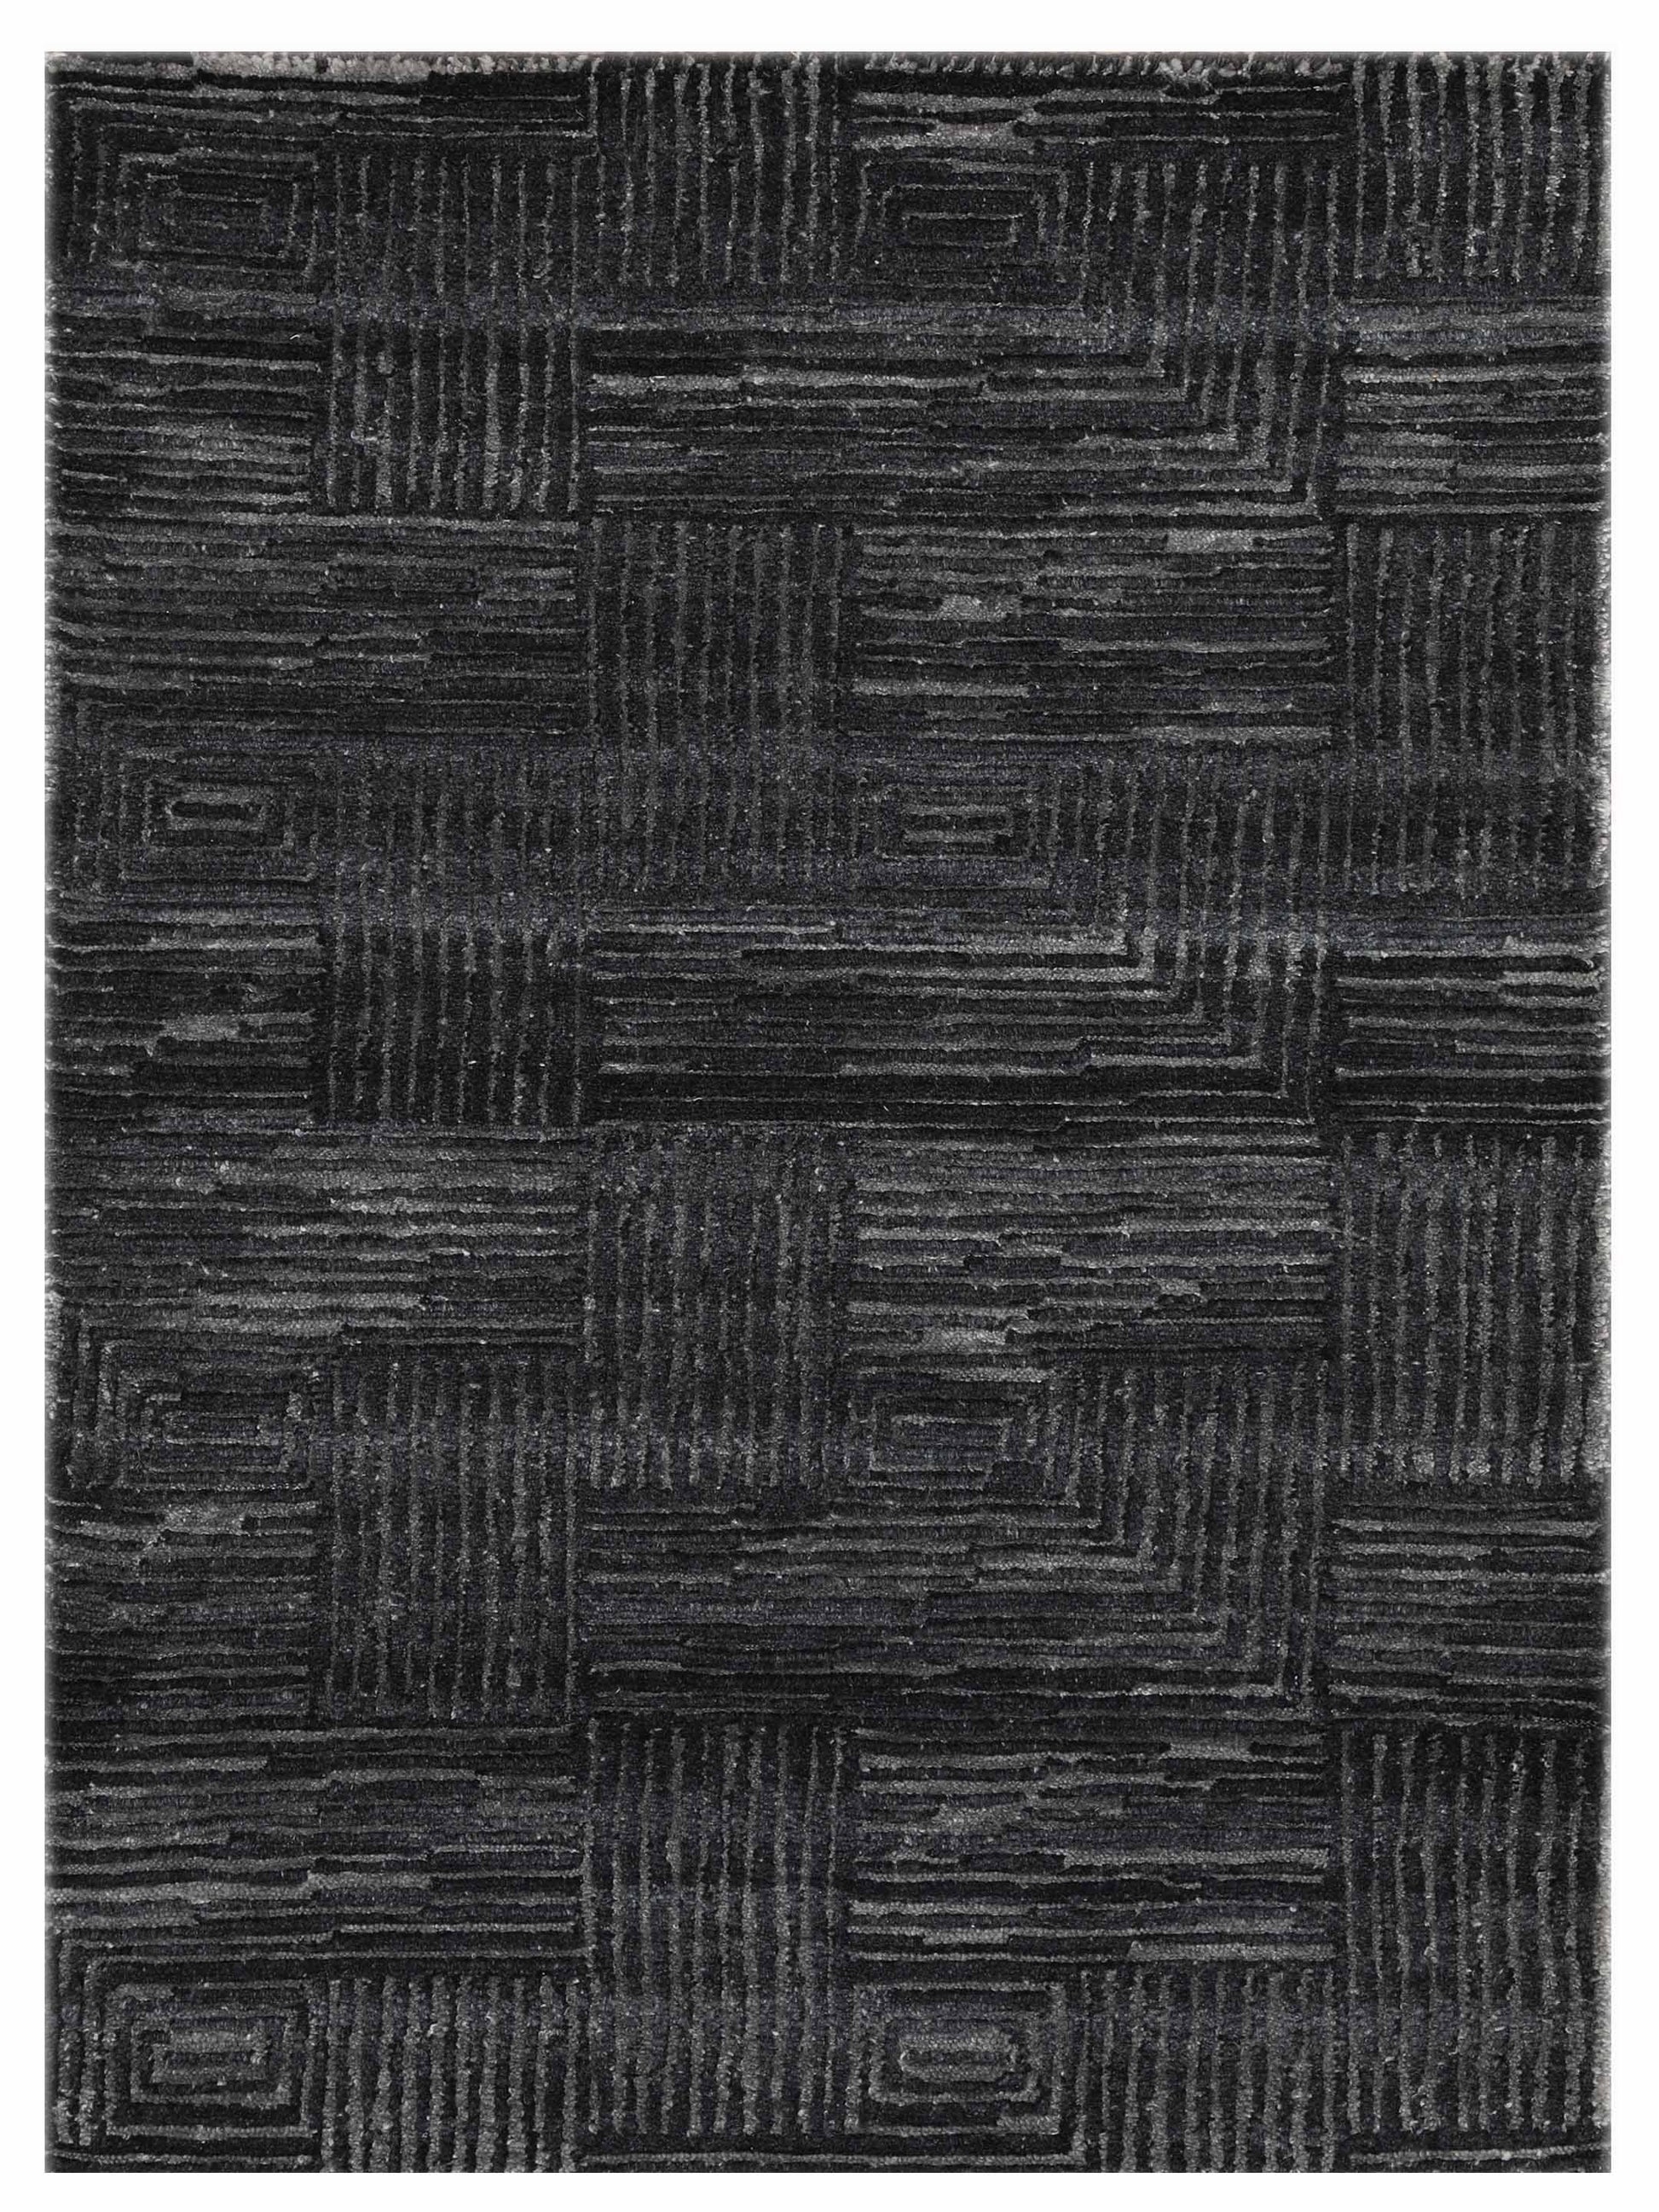 Artisan Mary MN-288 Grey Contemporary Knotted Rug